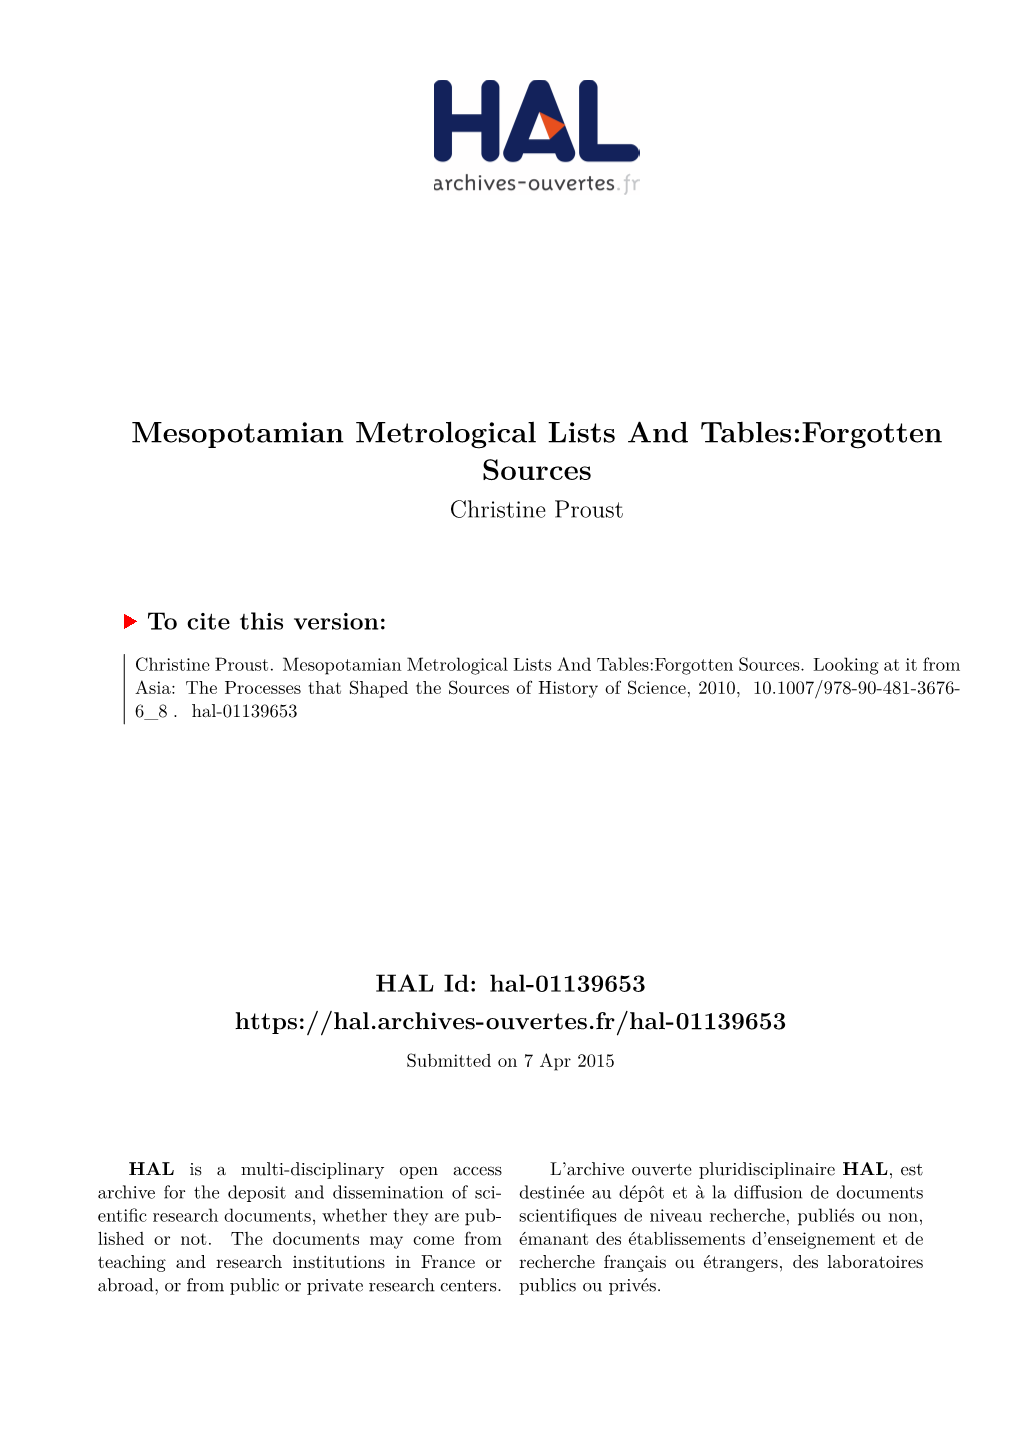 Mesopotamian Metrological Lists and Tables:Forgotten Sources Christine Proust